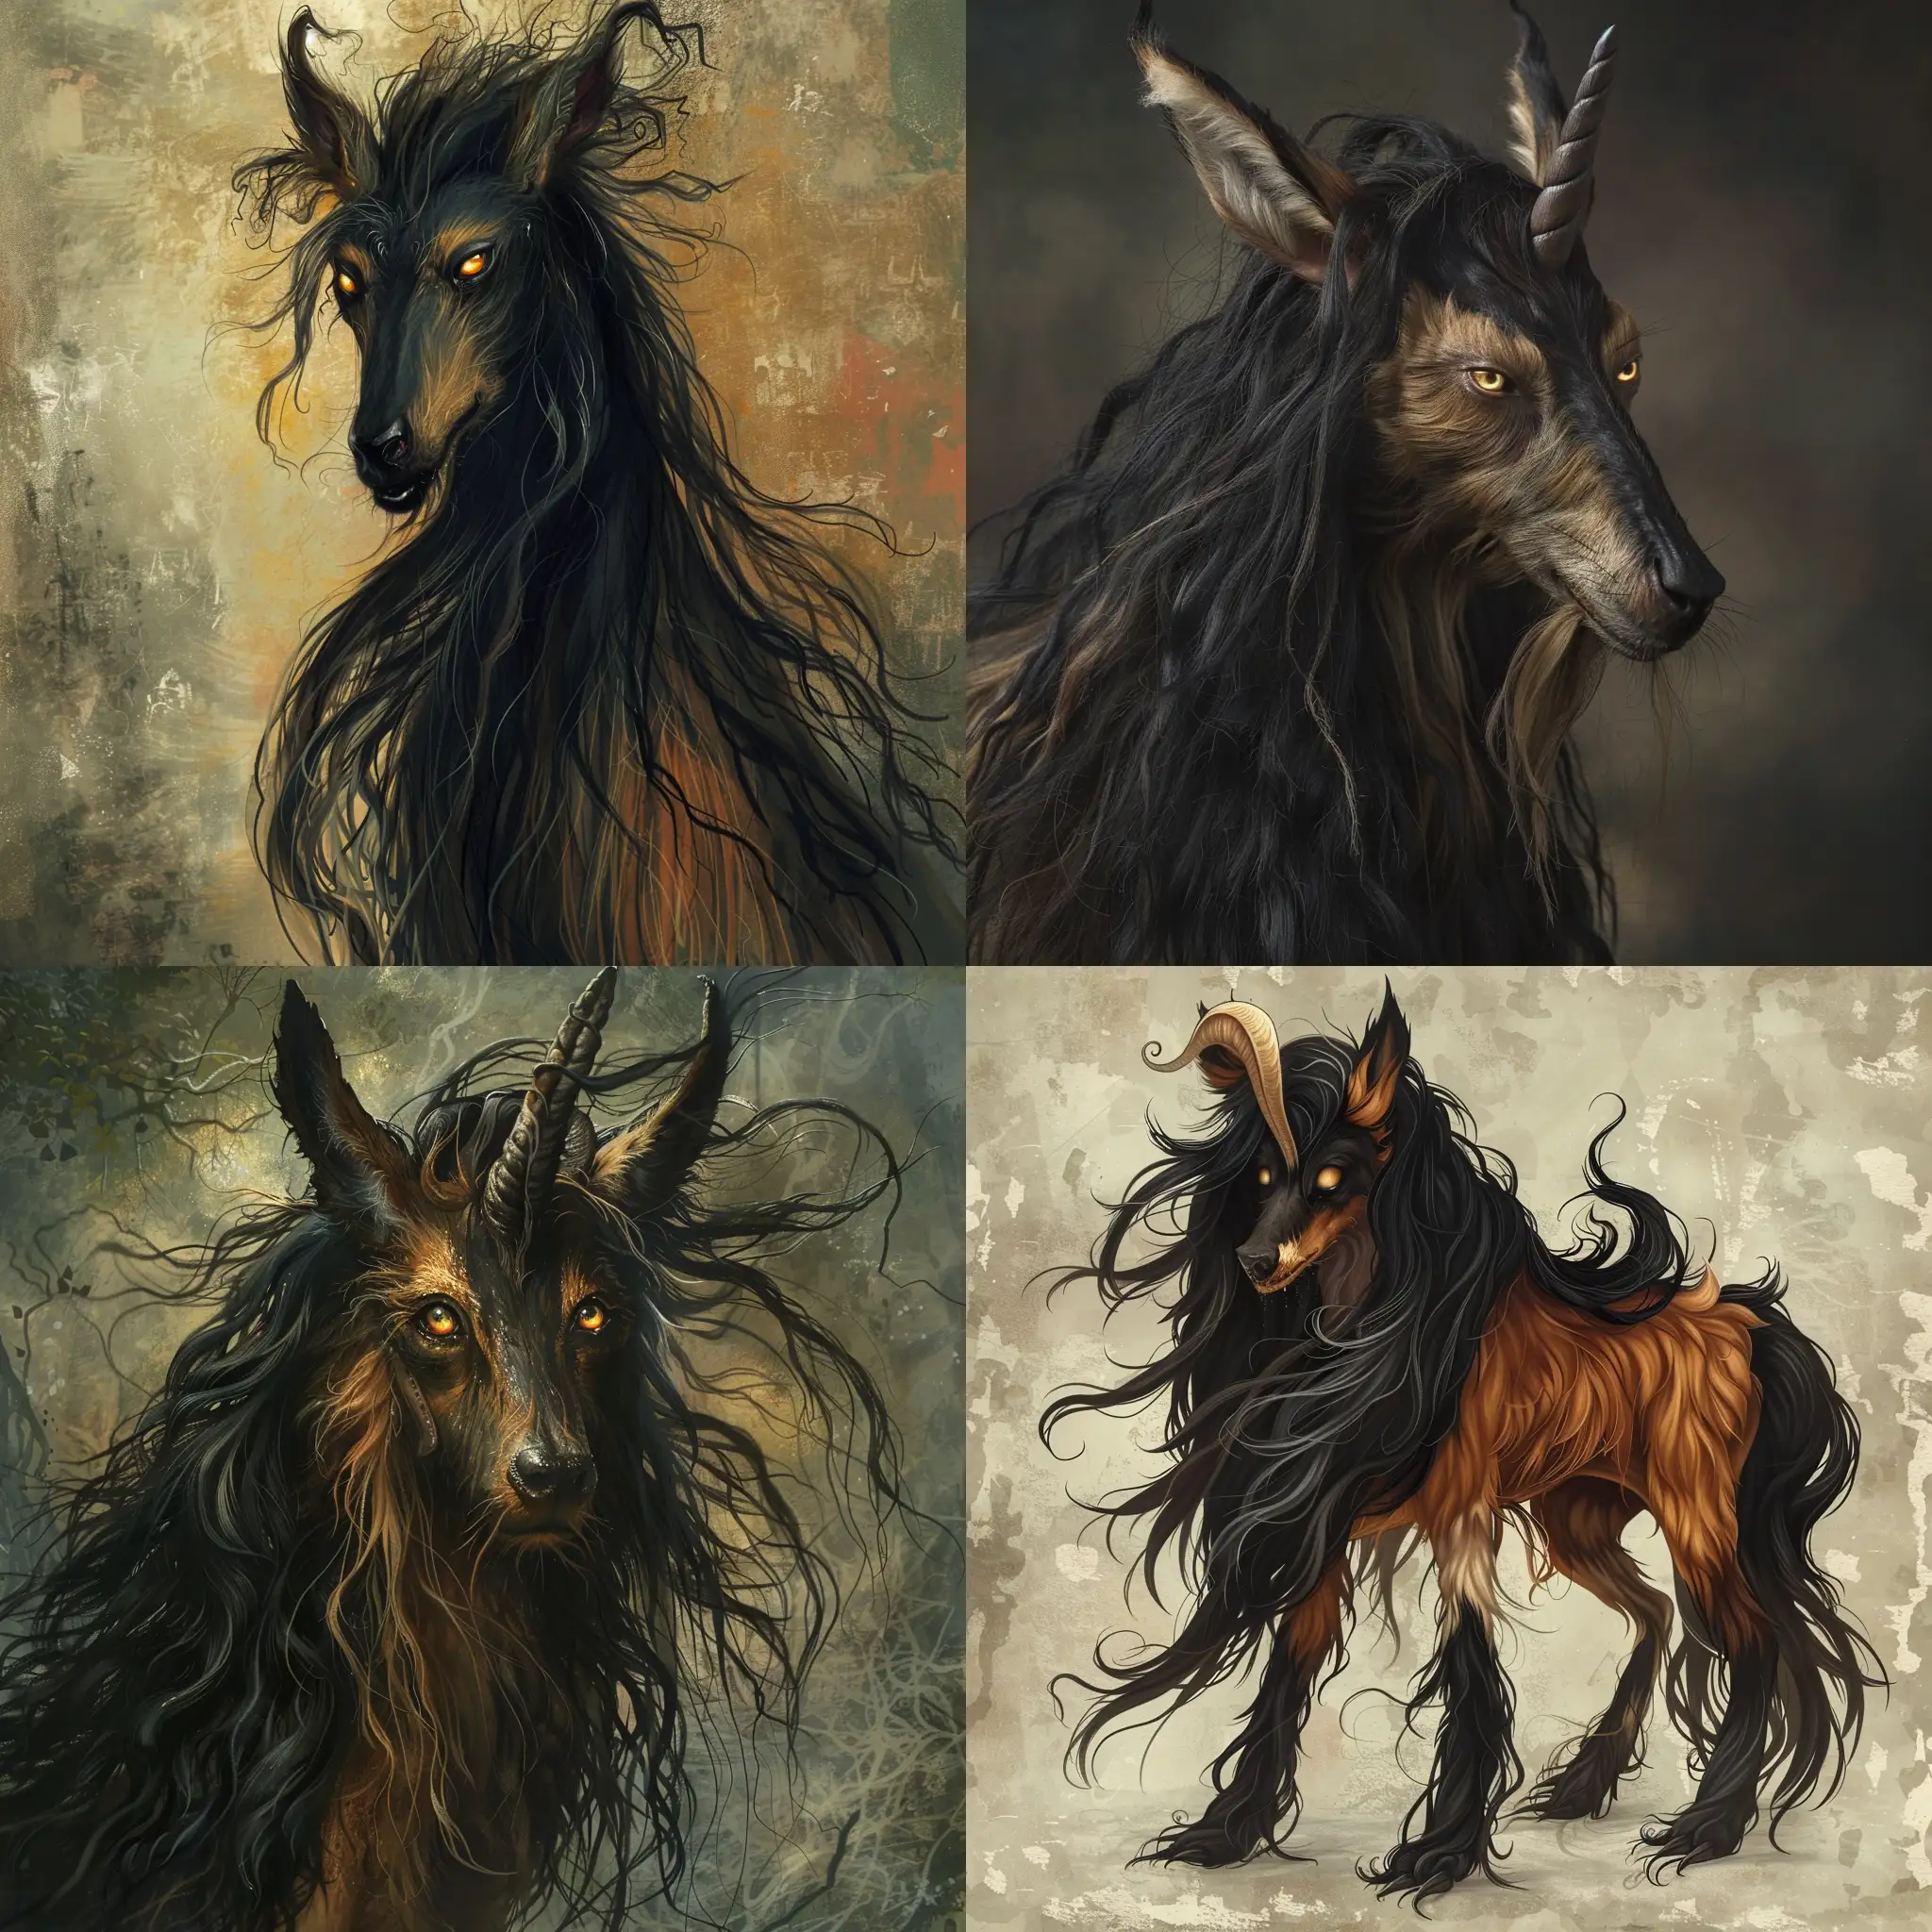 an irish fairy called a puca. it is mischevious but an adept shape shifter. it can go from a fox to a cat to a dog to a goat to a gremblin to a horse. Púca, the expert shape-shifter, had transformed into a dog with goat ears, retaining the horse's long black mane and luminescent golden eyes.  a strange being, part dog and part horse, with a coat of long, black hair and eyes that glowed like molten gold.  